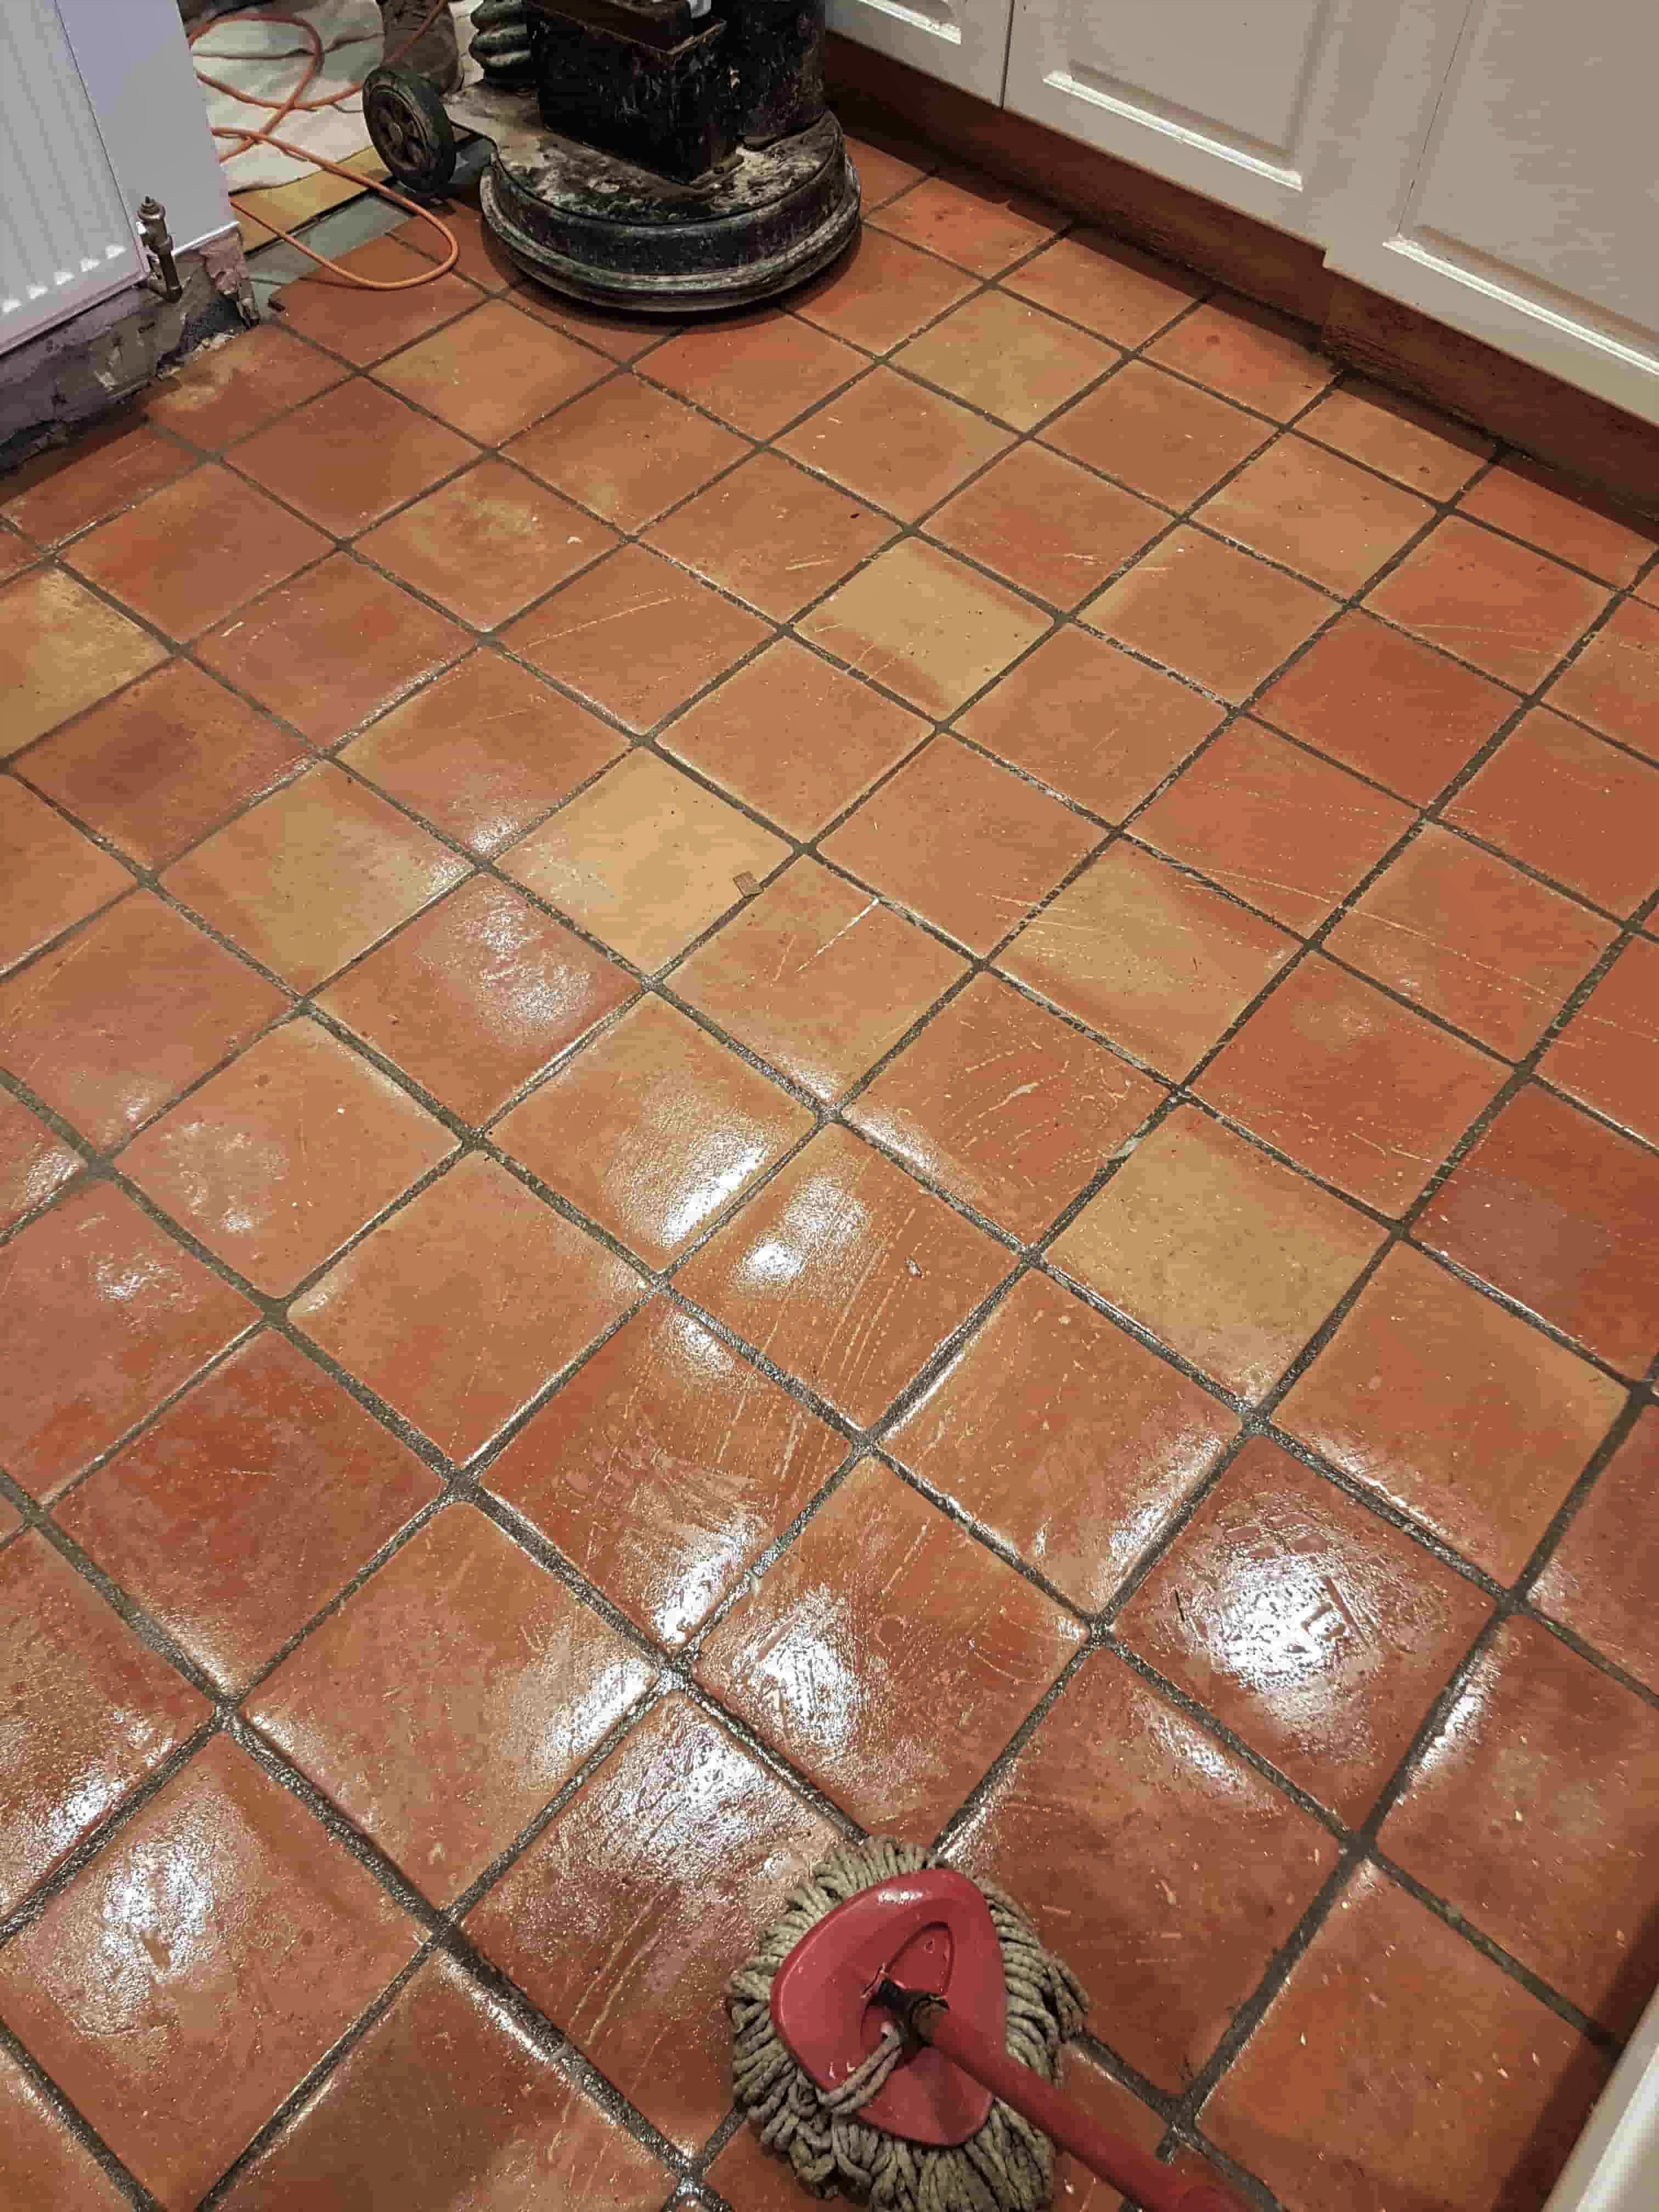 Terracotta Tiled Kitchen Floor During Cleaning Whightgate Northwich